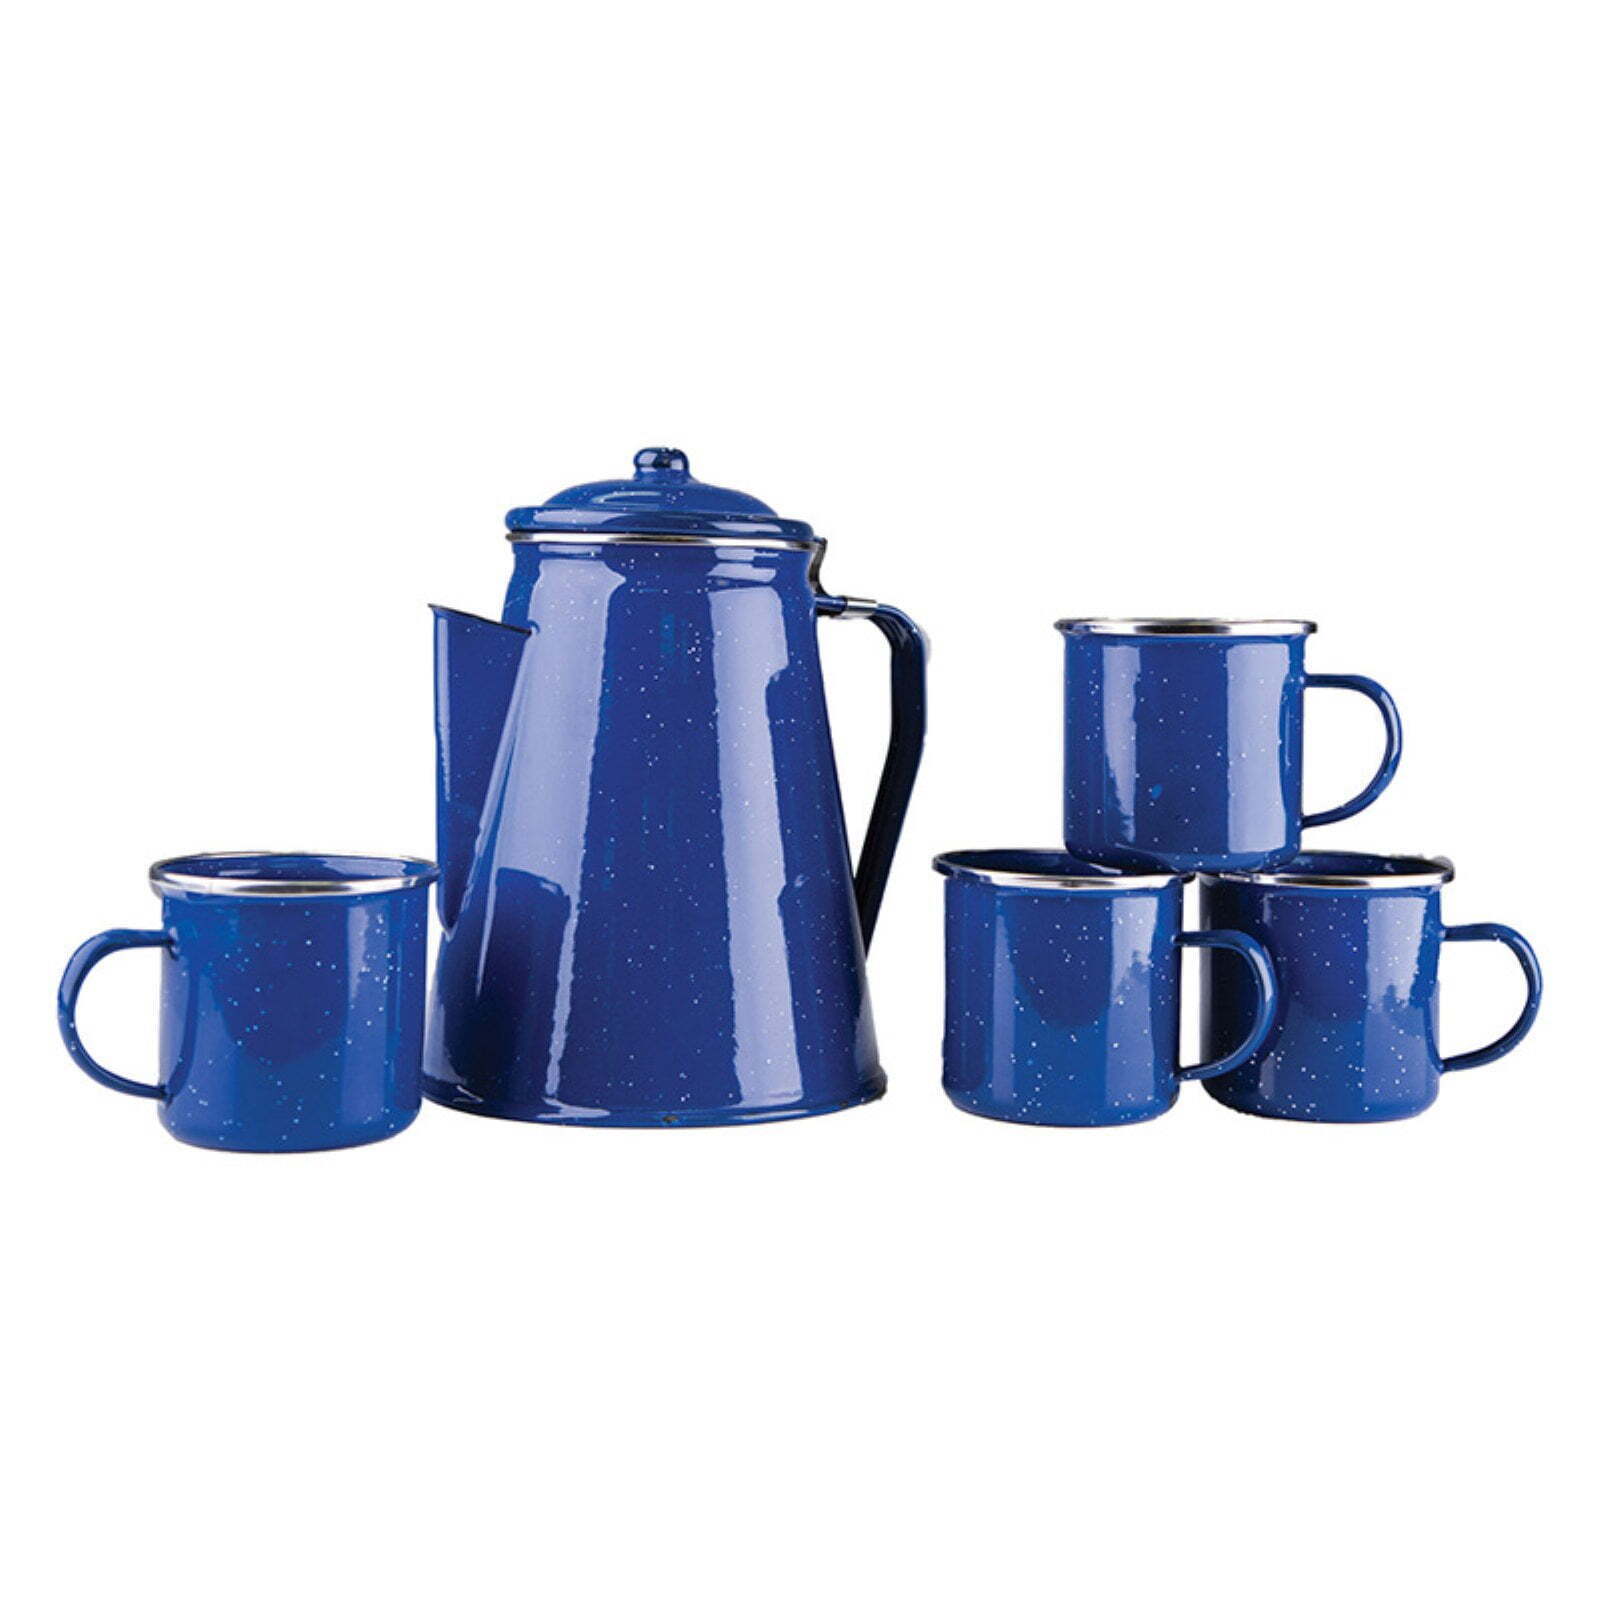 Enamel 8 Cup Coffee Pot with Percolator And 4 12 Ounce Mugs Blue (1123